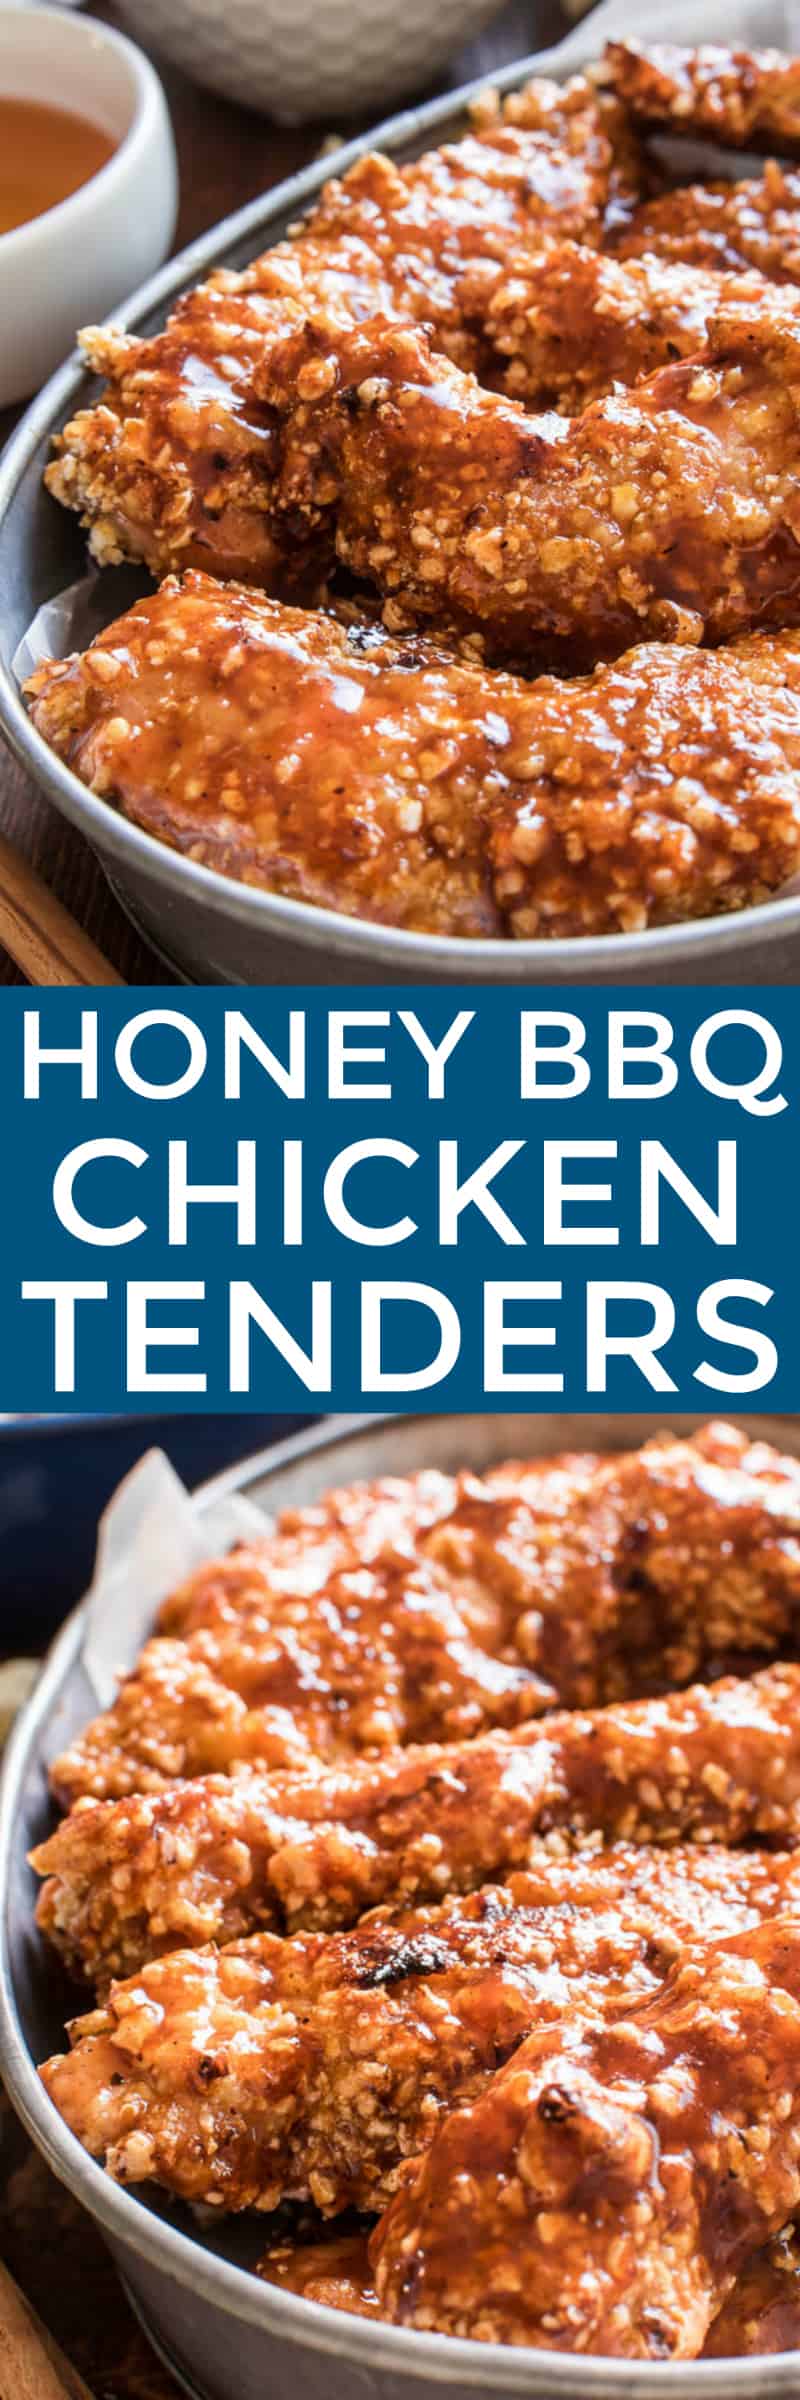 Honey BBQ Chicken Tenders are the perfect option for easy weeknight dinners! Tender, juicy chicken dipped in barbecue sauce, coated in crunchy kettle corn, and finished off with a sweet honey barbecue glaze. These chicken tenders are oven-baked and make a delicious family meal....and they're perfect for game days, too. If your family loves chicken tenders, this recipe is a must make!